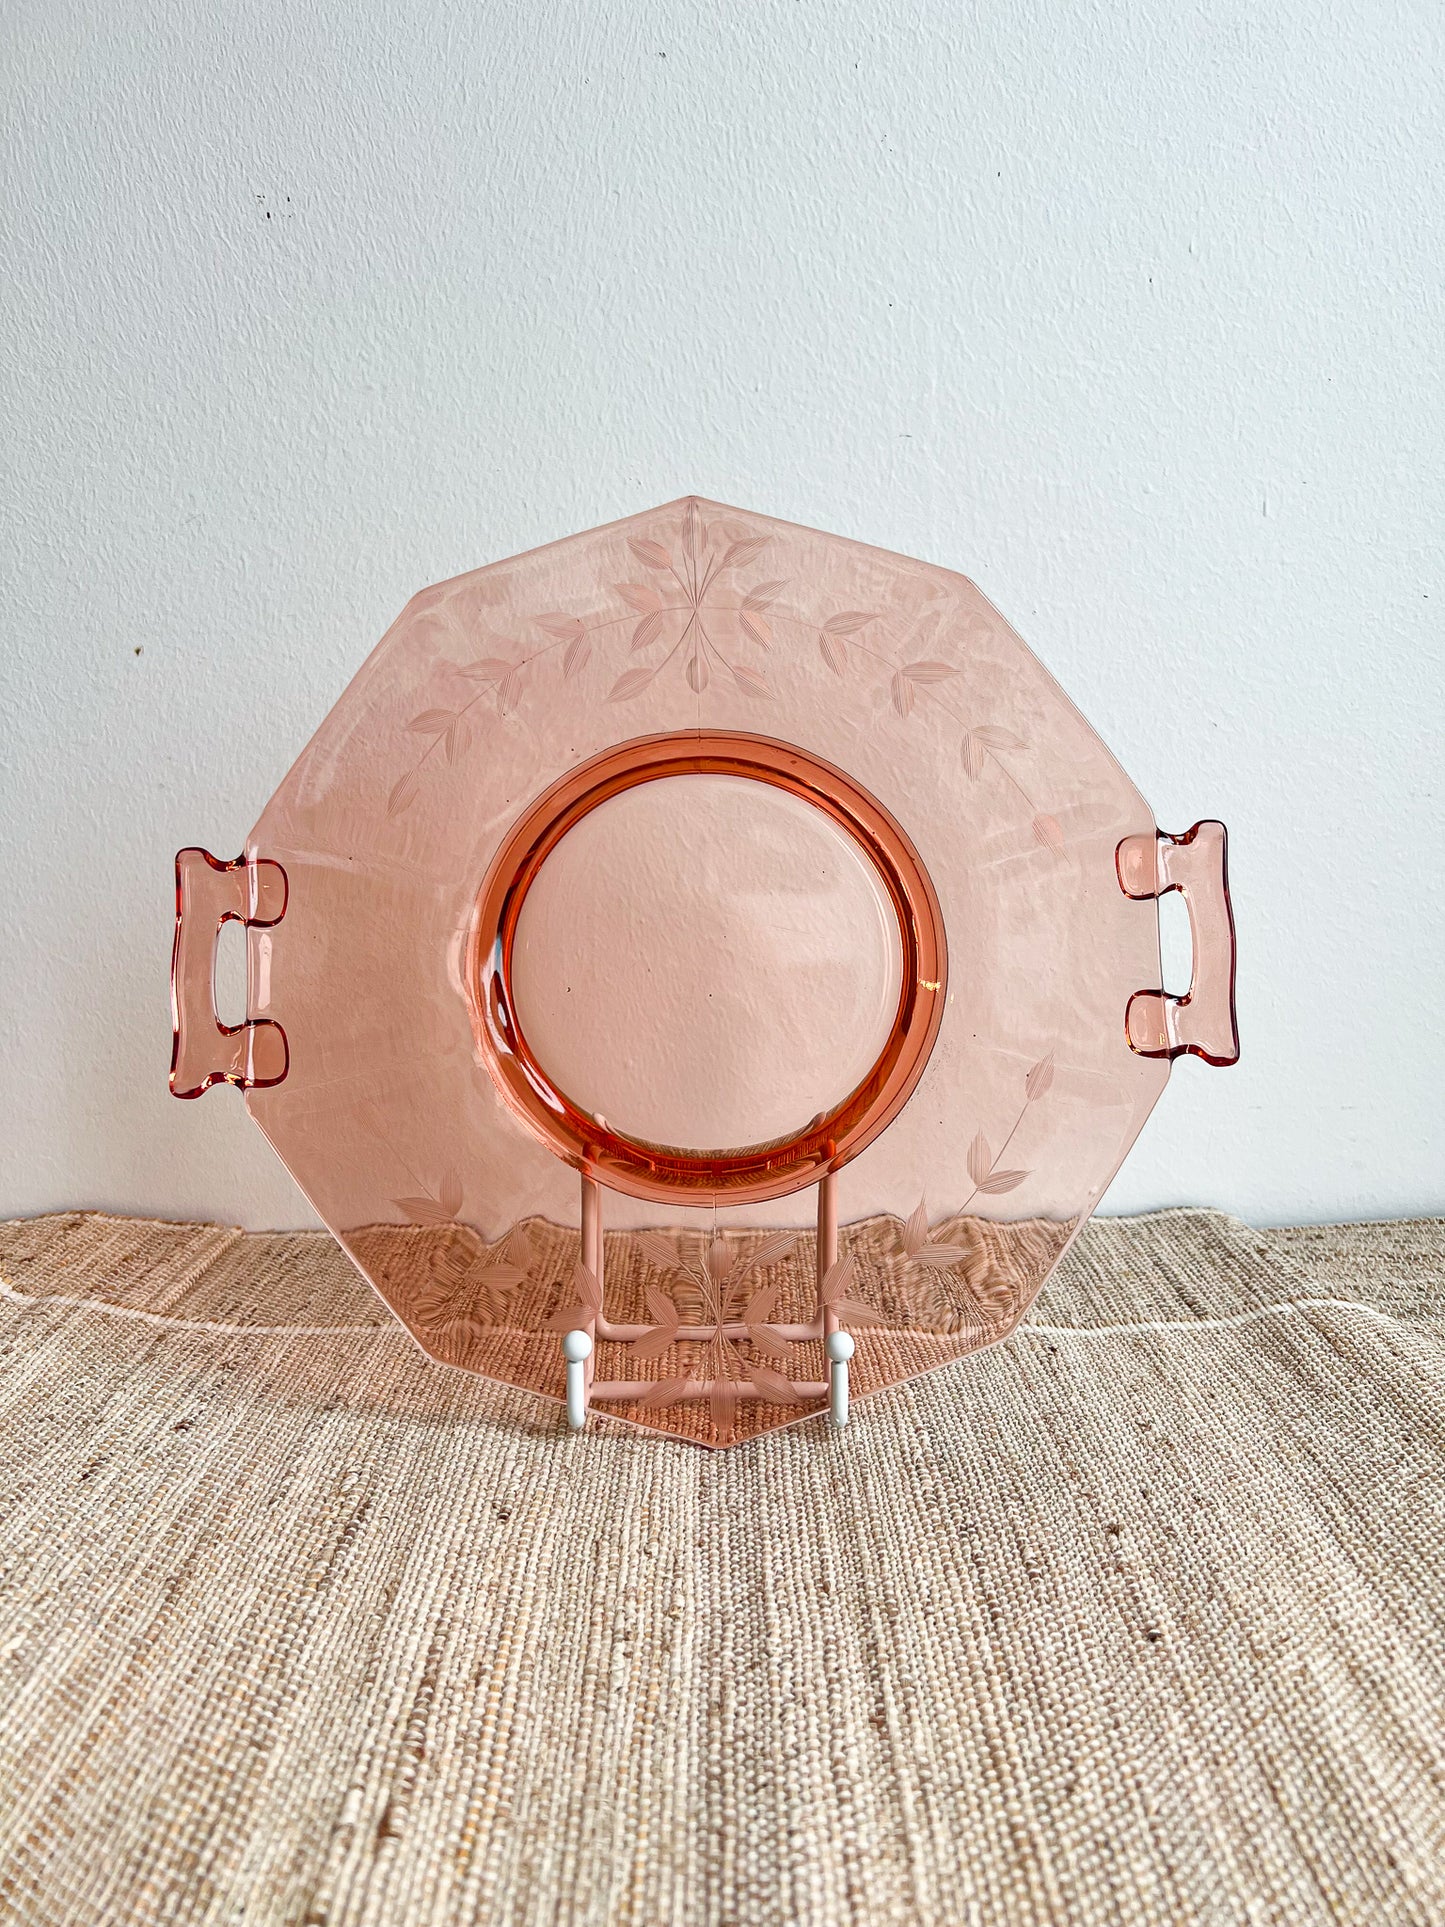 Vintage 1930s Imperial Molly Pink Depression Glass Dessert Tray